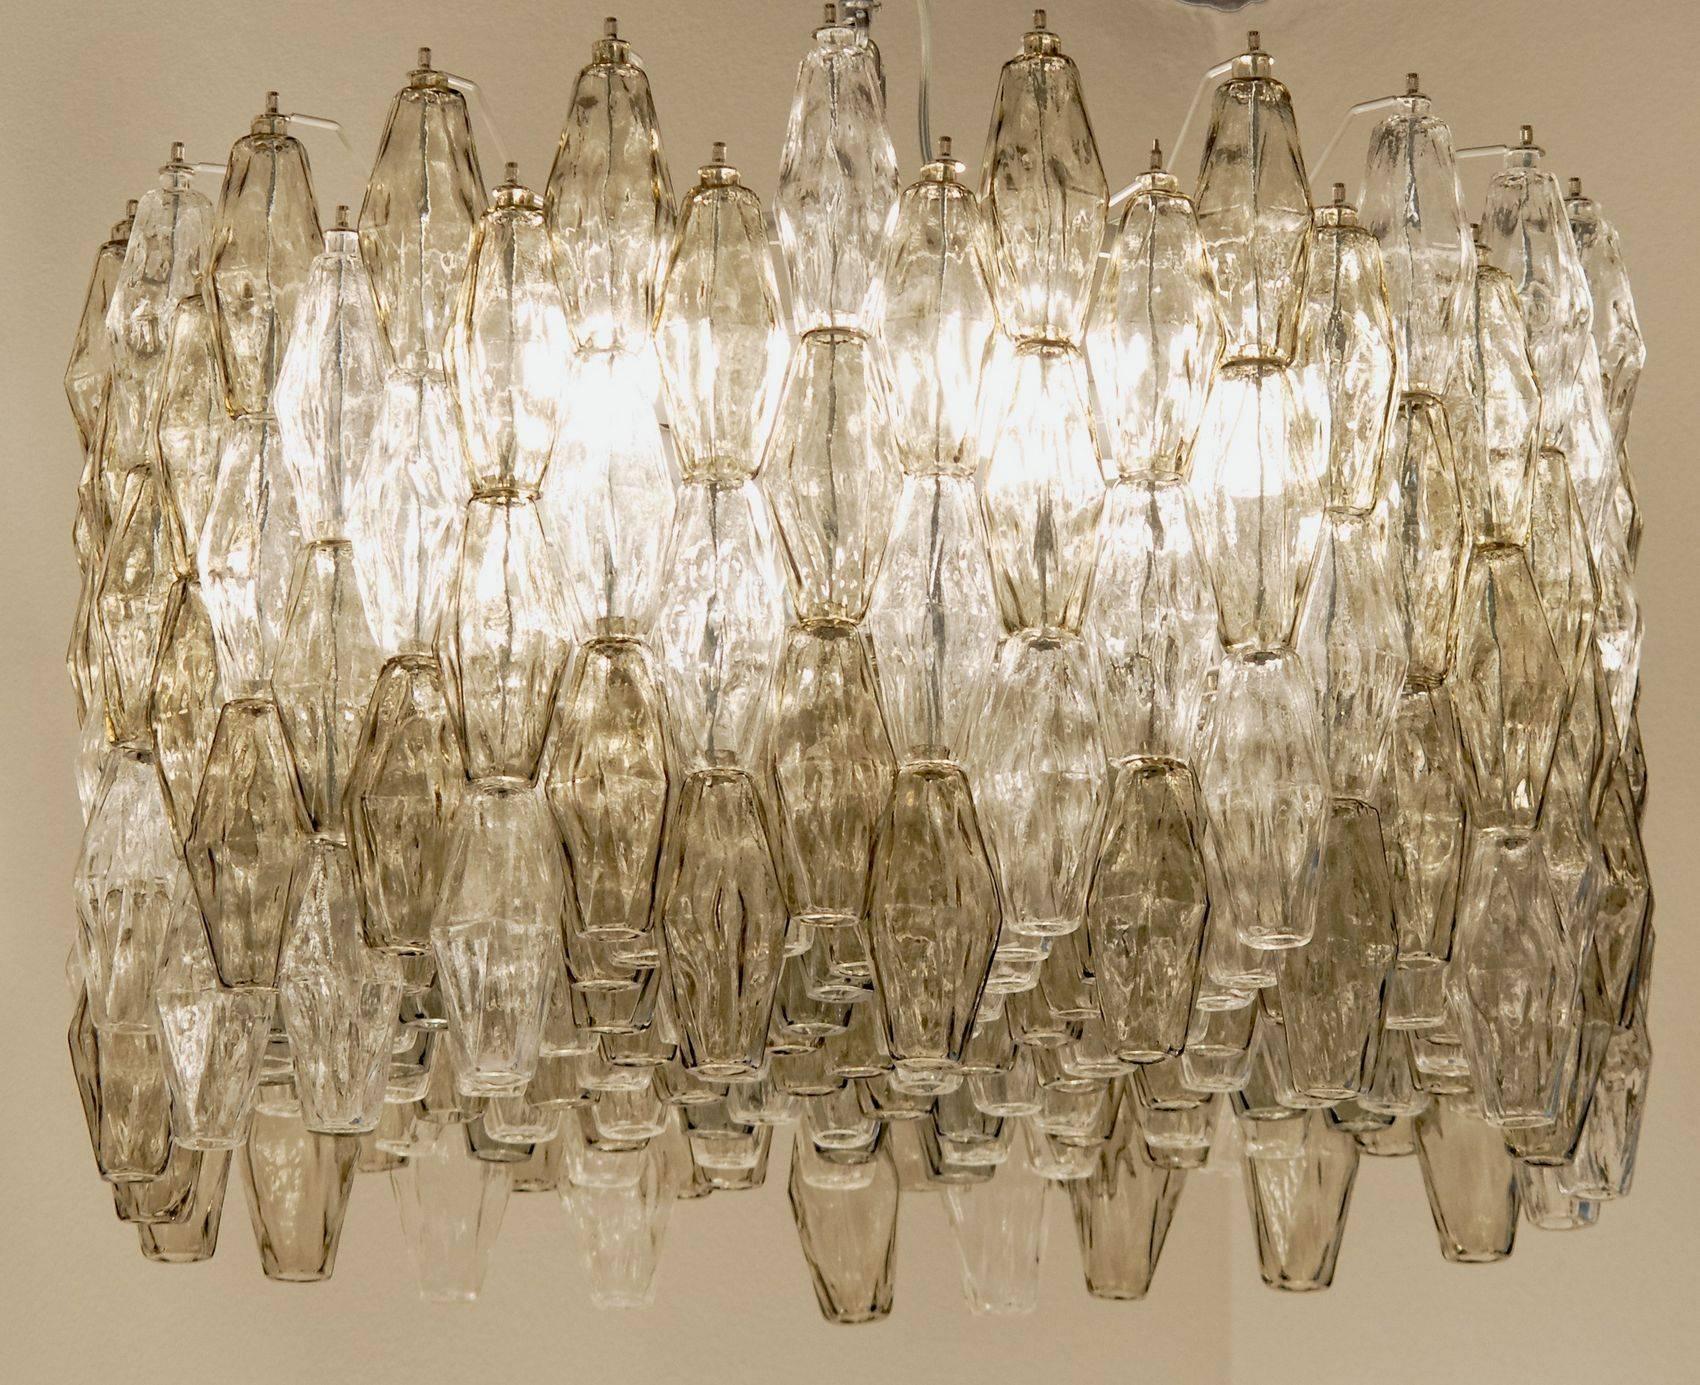 Magnificent iconic Mid-Century chandelier. For modern and eclectic homes. Would also be stunning in public places. The gray and clear color combination fits the color trends for home furnishing.

Poliedri or polyhedral chandelier. Very interesting